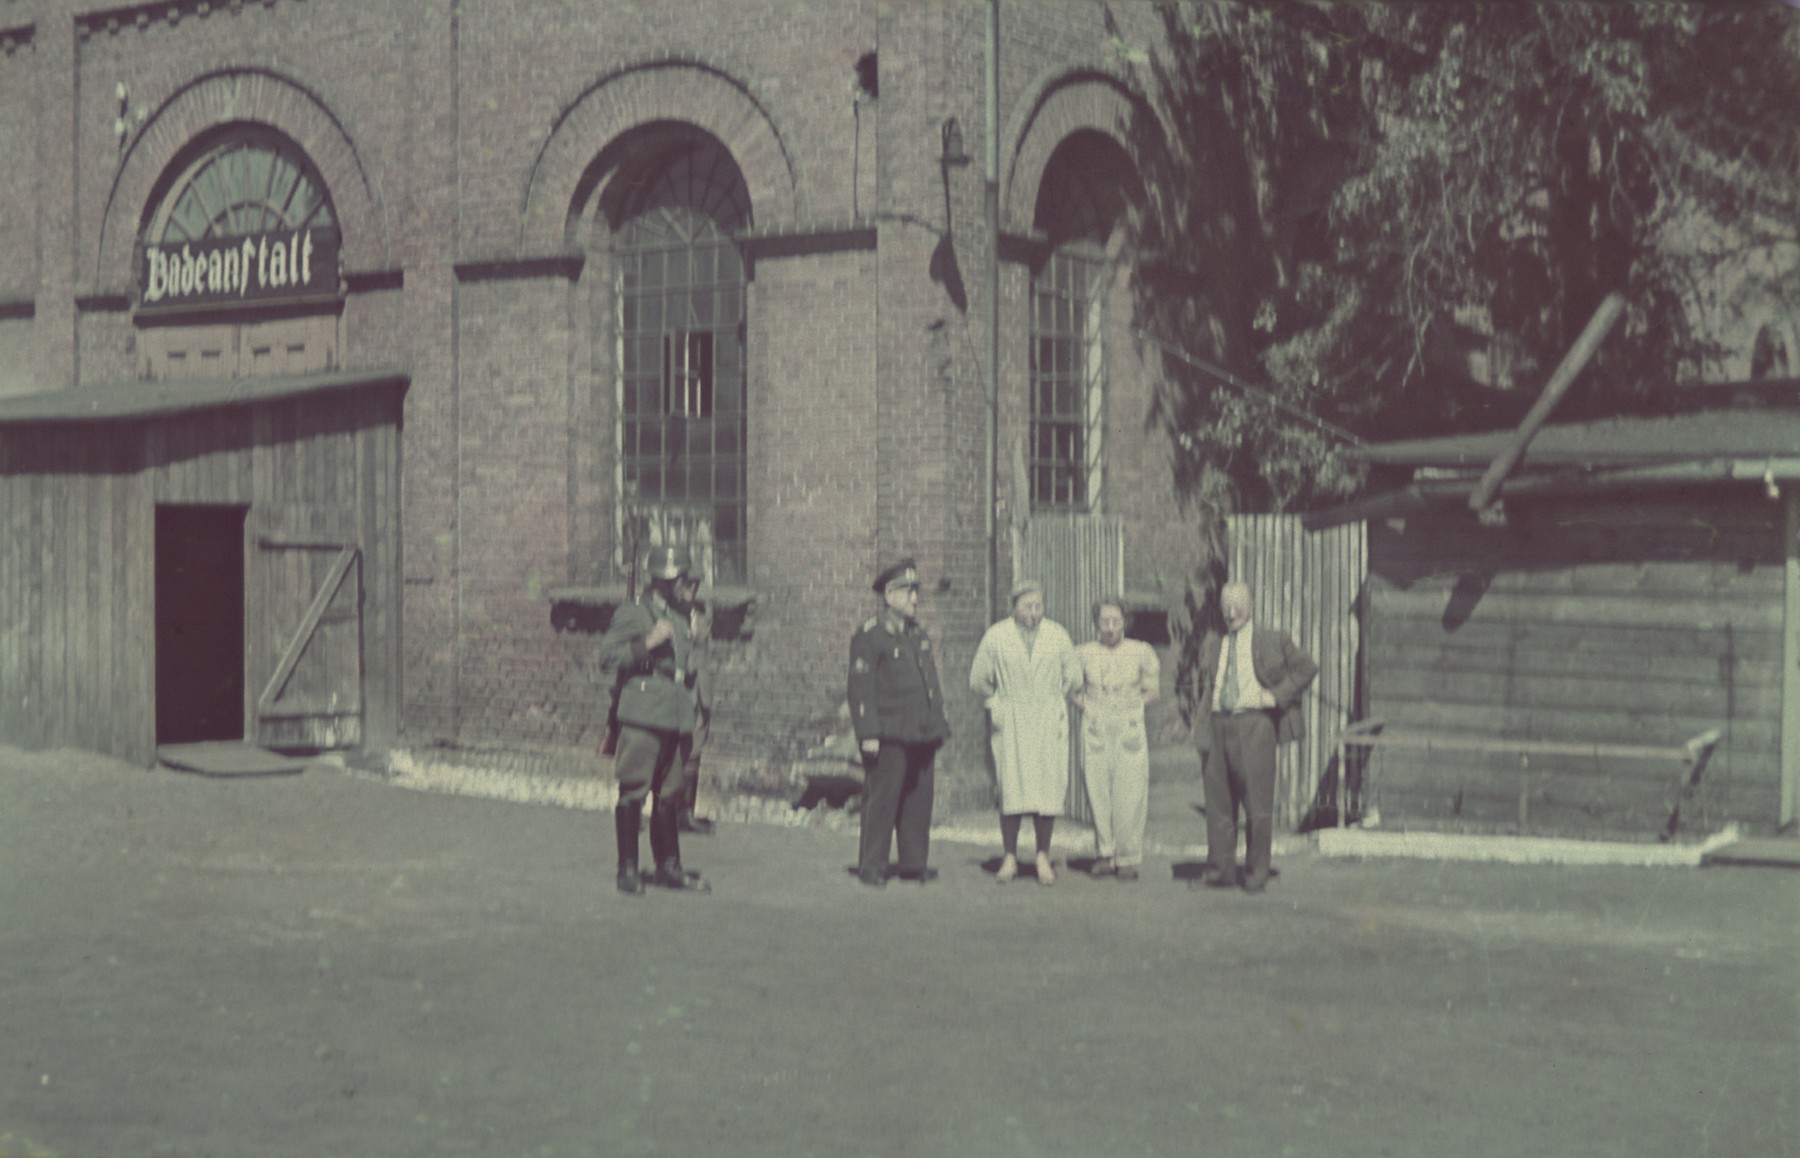 German officials stand outside the delousing baths in Pabiance.

Original German caption: "Pabianice: Entlausungstelle (delousing), #38.